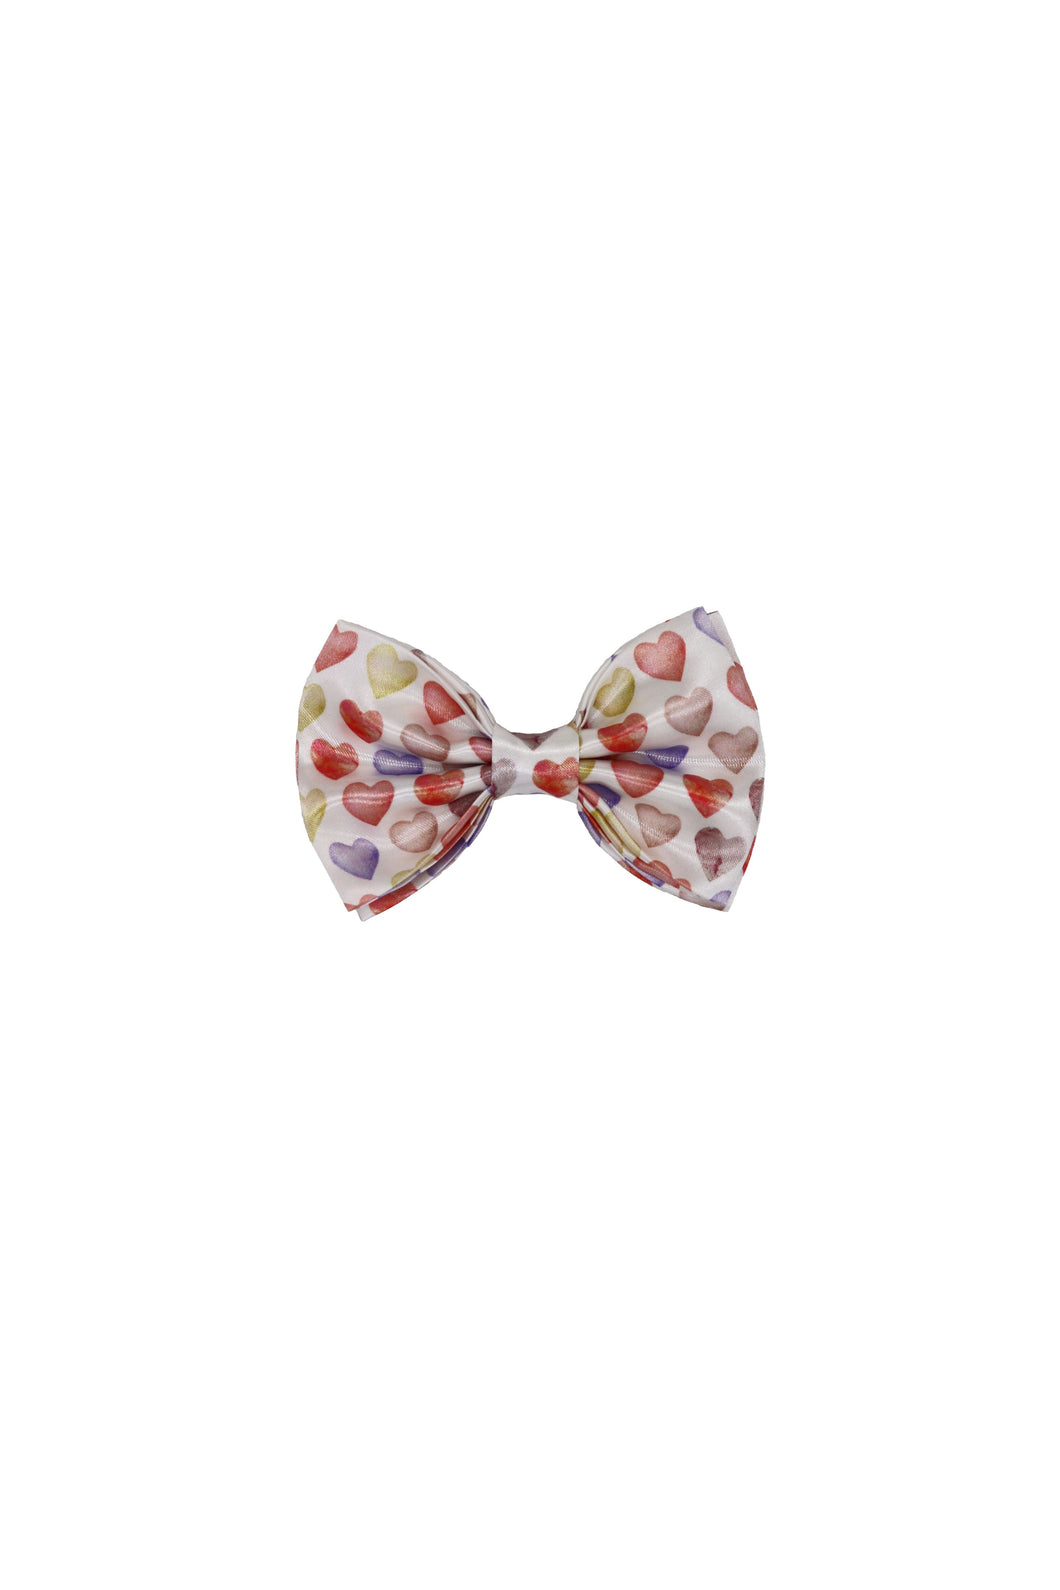 Double Bow Tie - Fur-Ever Love